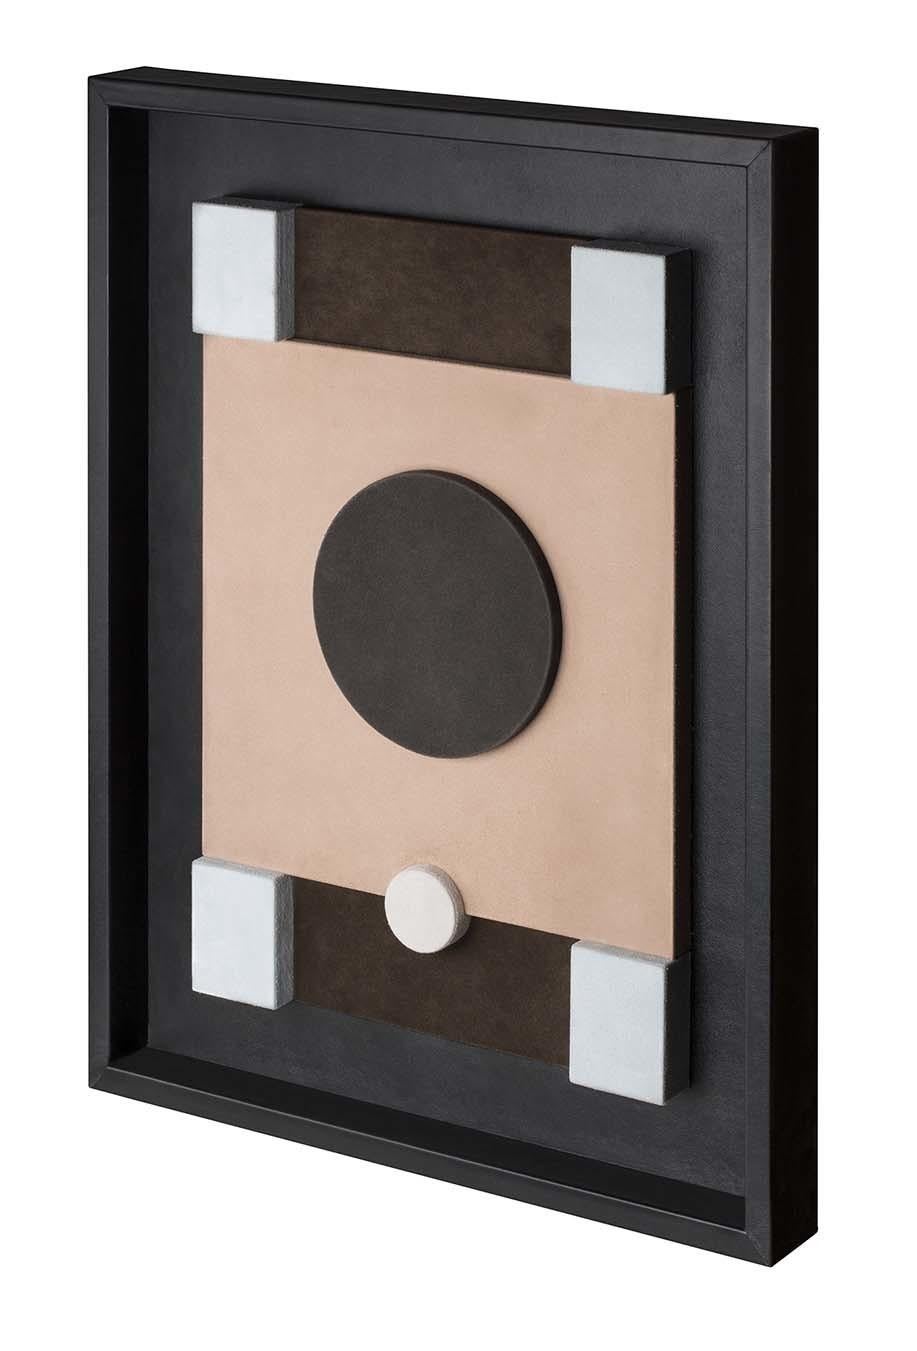 An abstract pattern with simple shapes and a basic color palette stands at the center of this remarkable wall sculpture. Created by GioBagnara as part of a series of decorative pieces entirely fashioned of leather, this piece features a black nappa